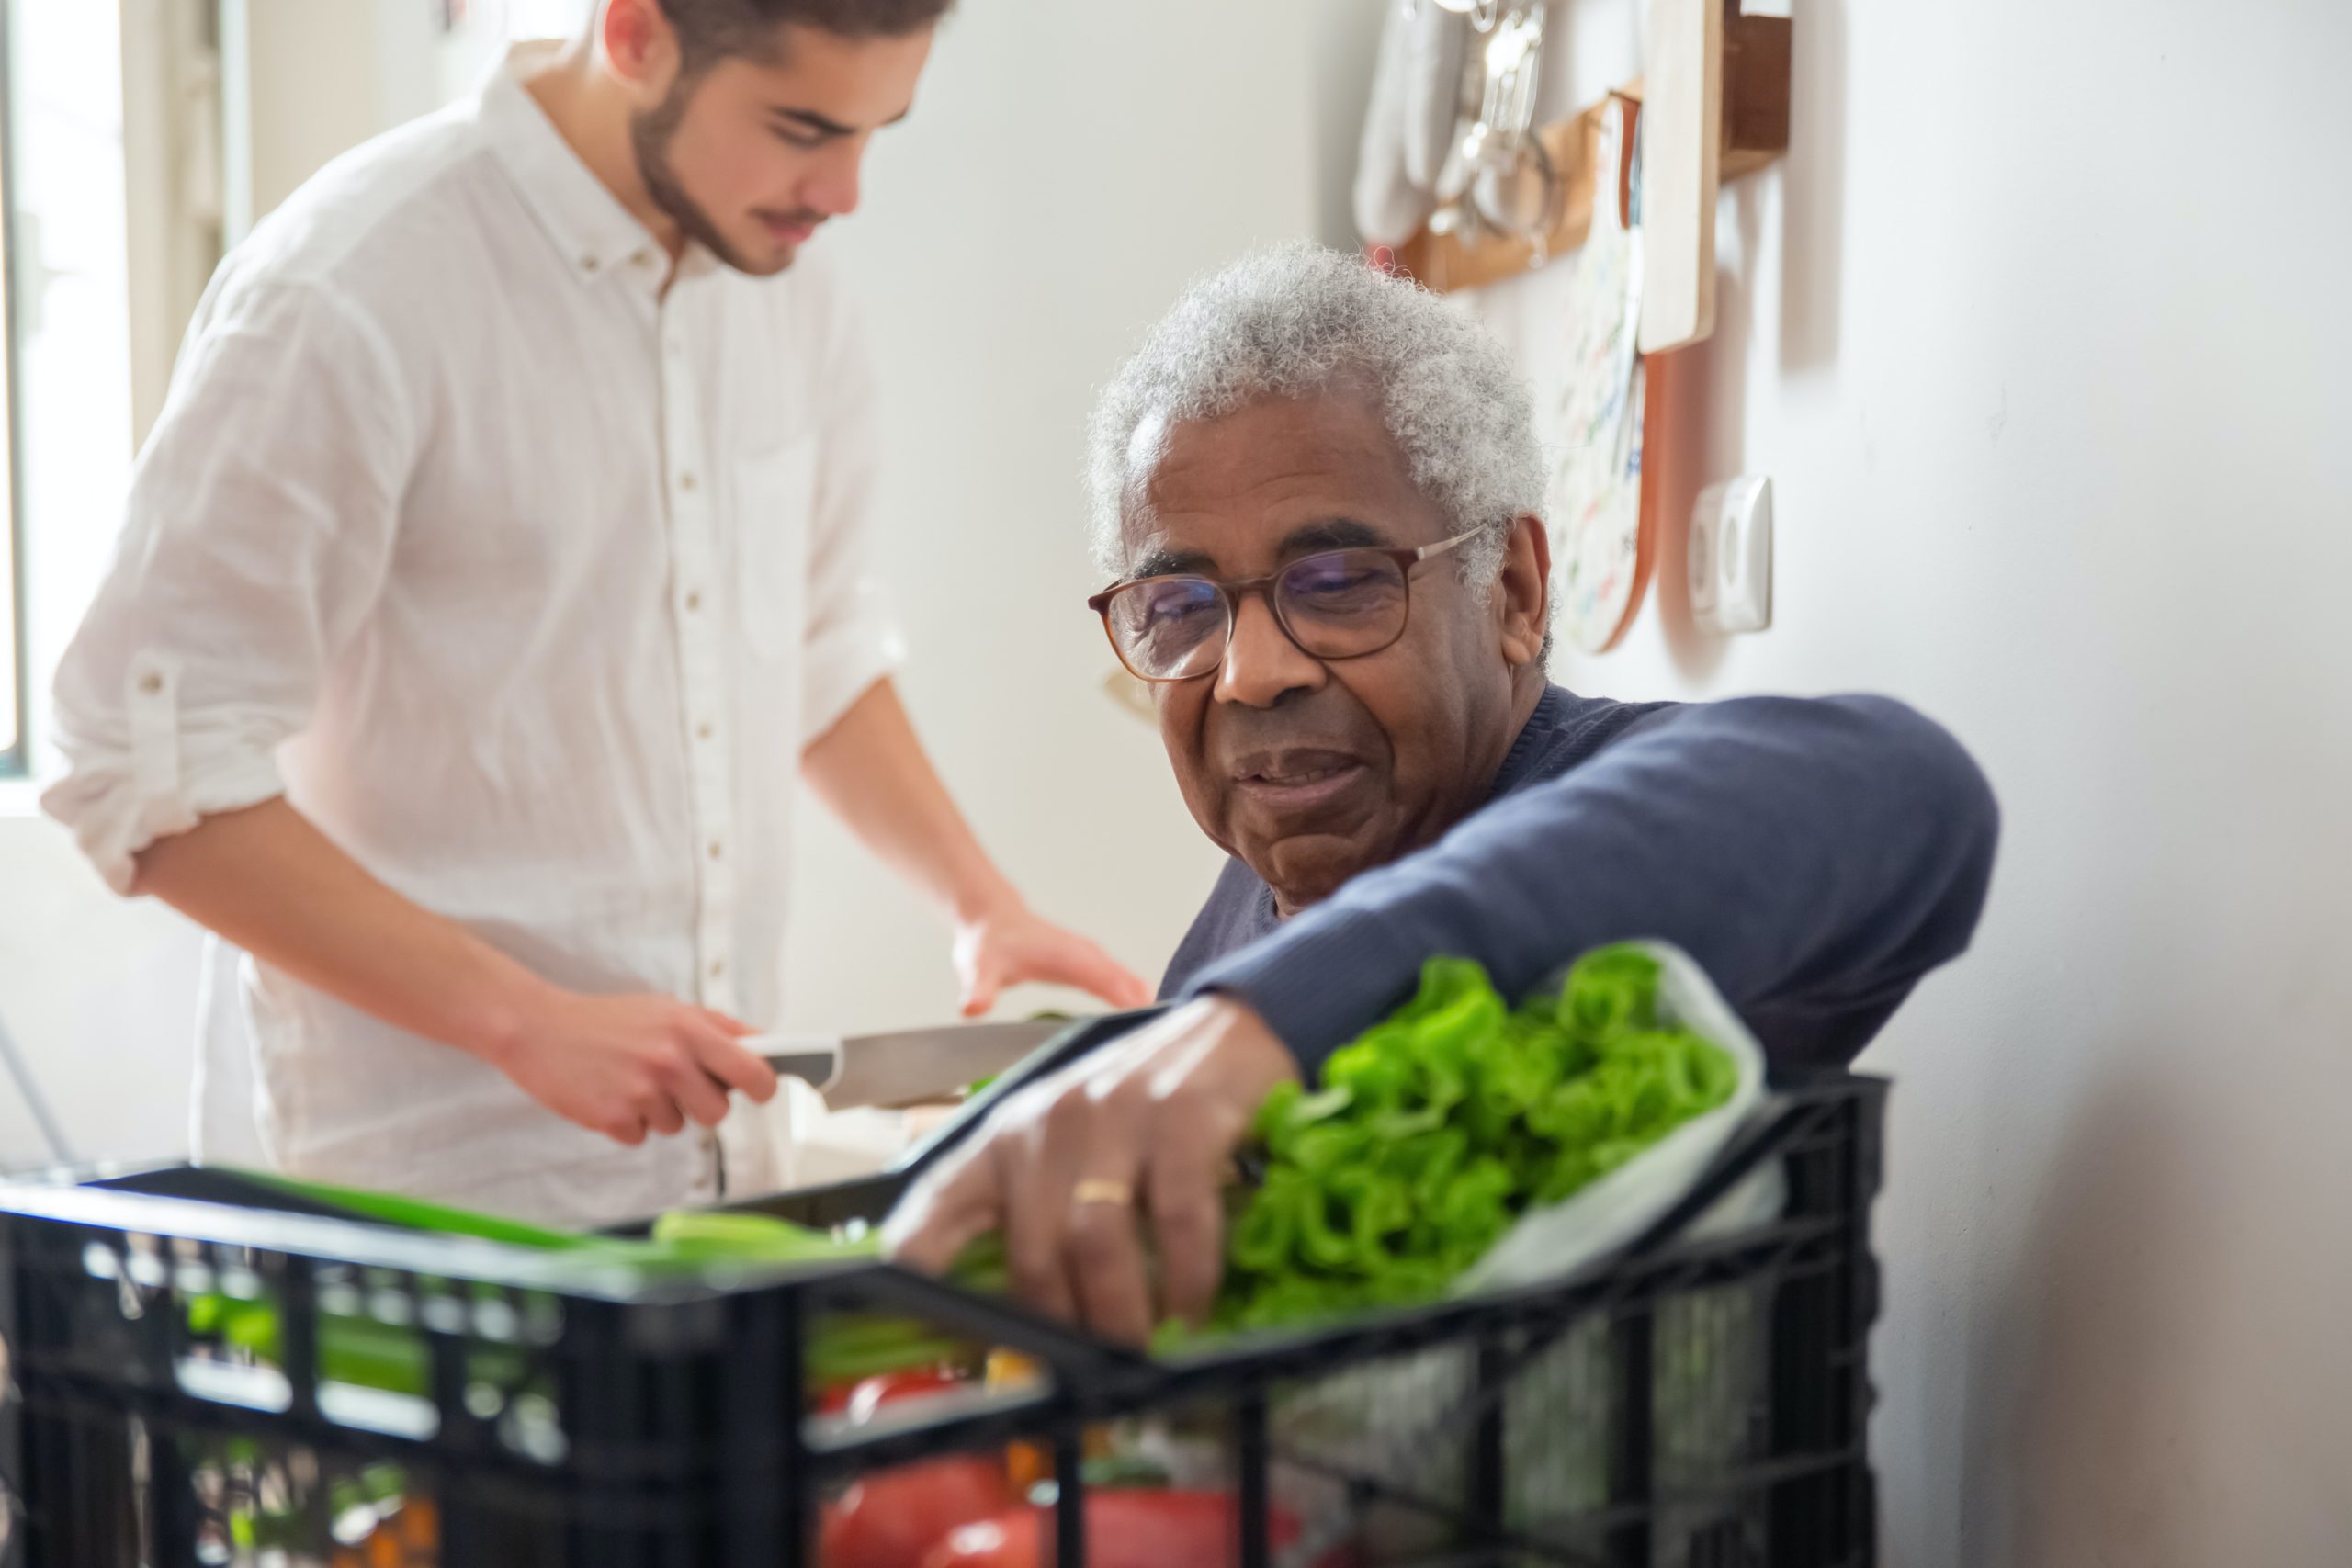 How Involvement in Food Preparation Can Help Maintain Independence?